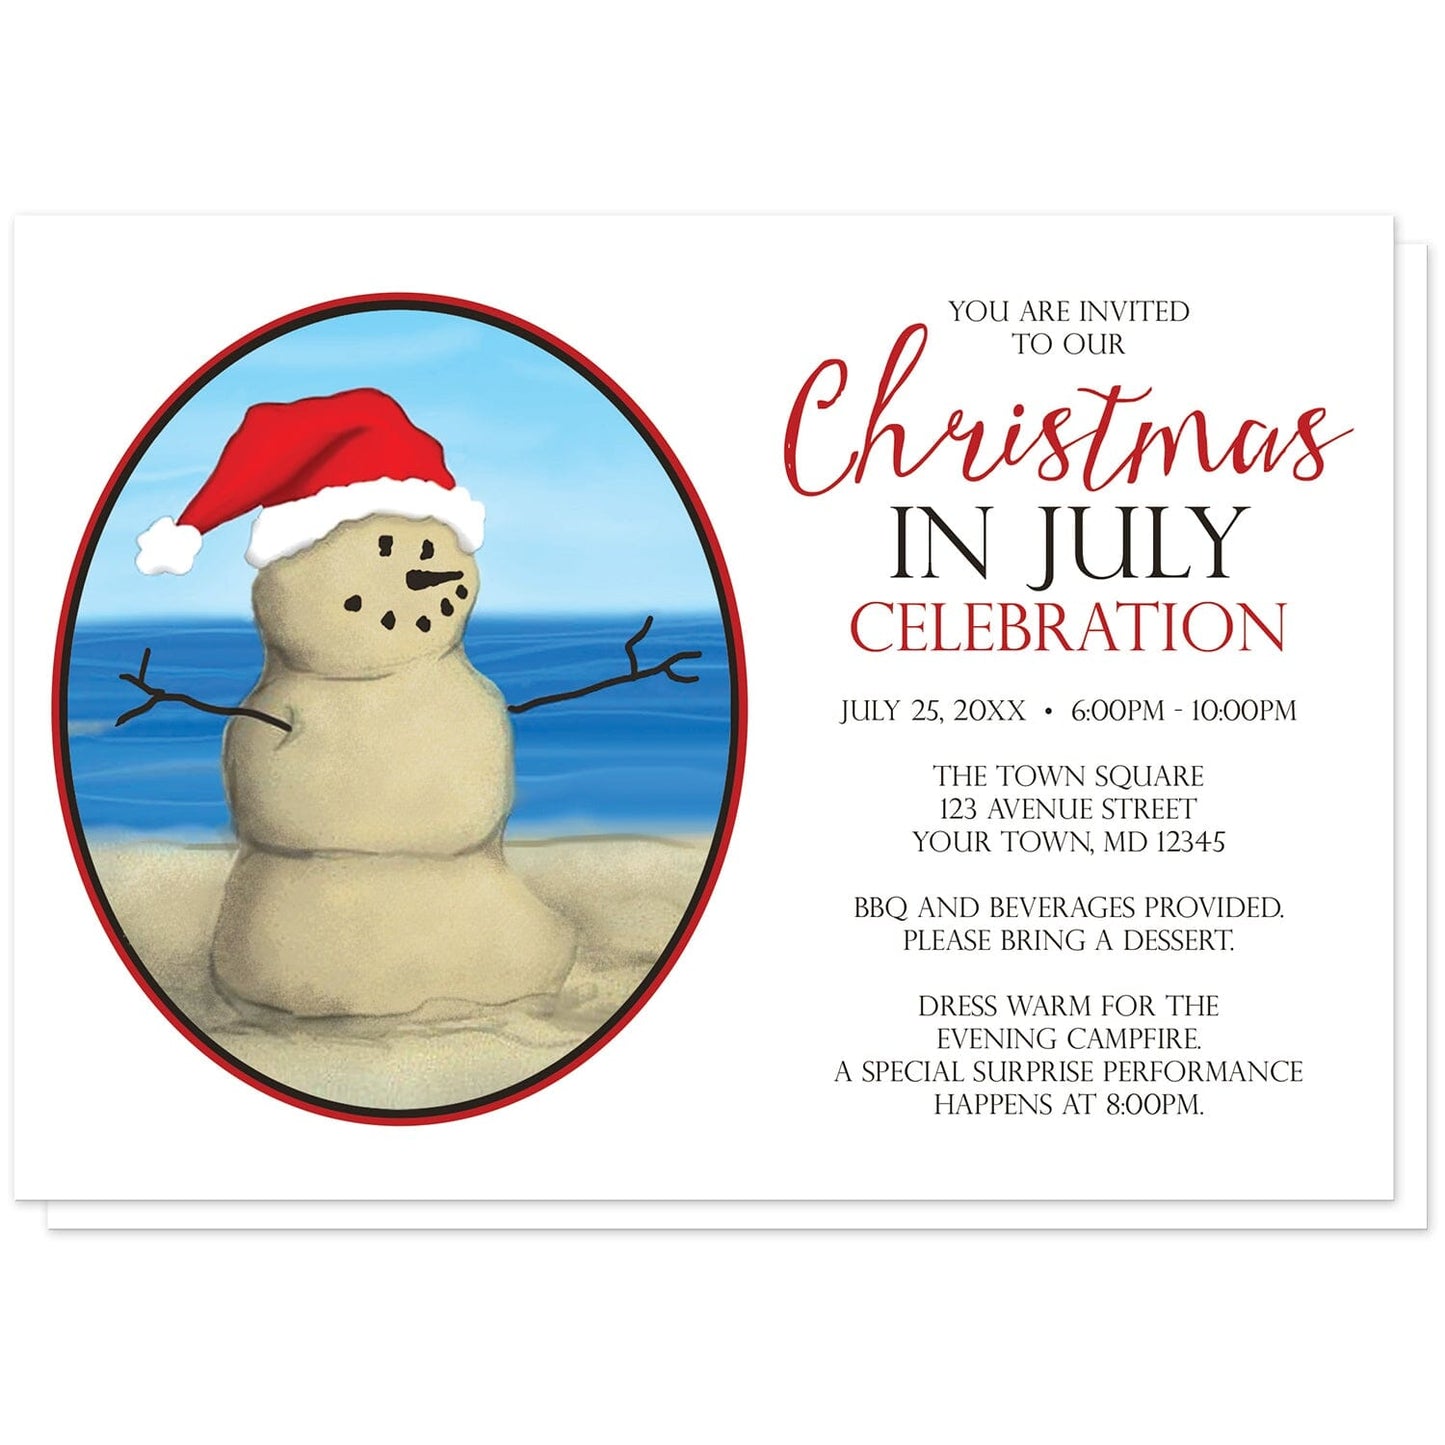 Sand Snowman Christmas in July Invitations at Artistically Invited. Modern sand snowman Christmas in July invitations with a unique illustration of a snowman made from sand and wearing a Santa Hat on the beach in front of the open water in an oval frame. Your personalized Christmas in July party details are custom printed in red and black over white to the right of the sand snowman drawing. 